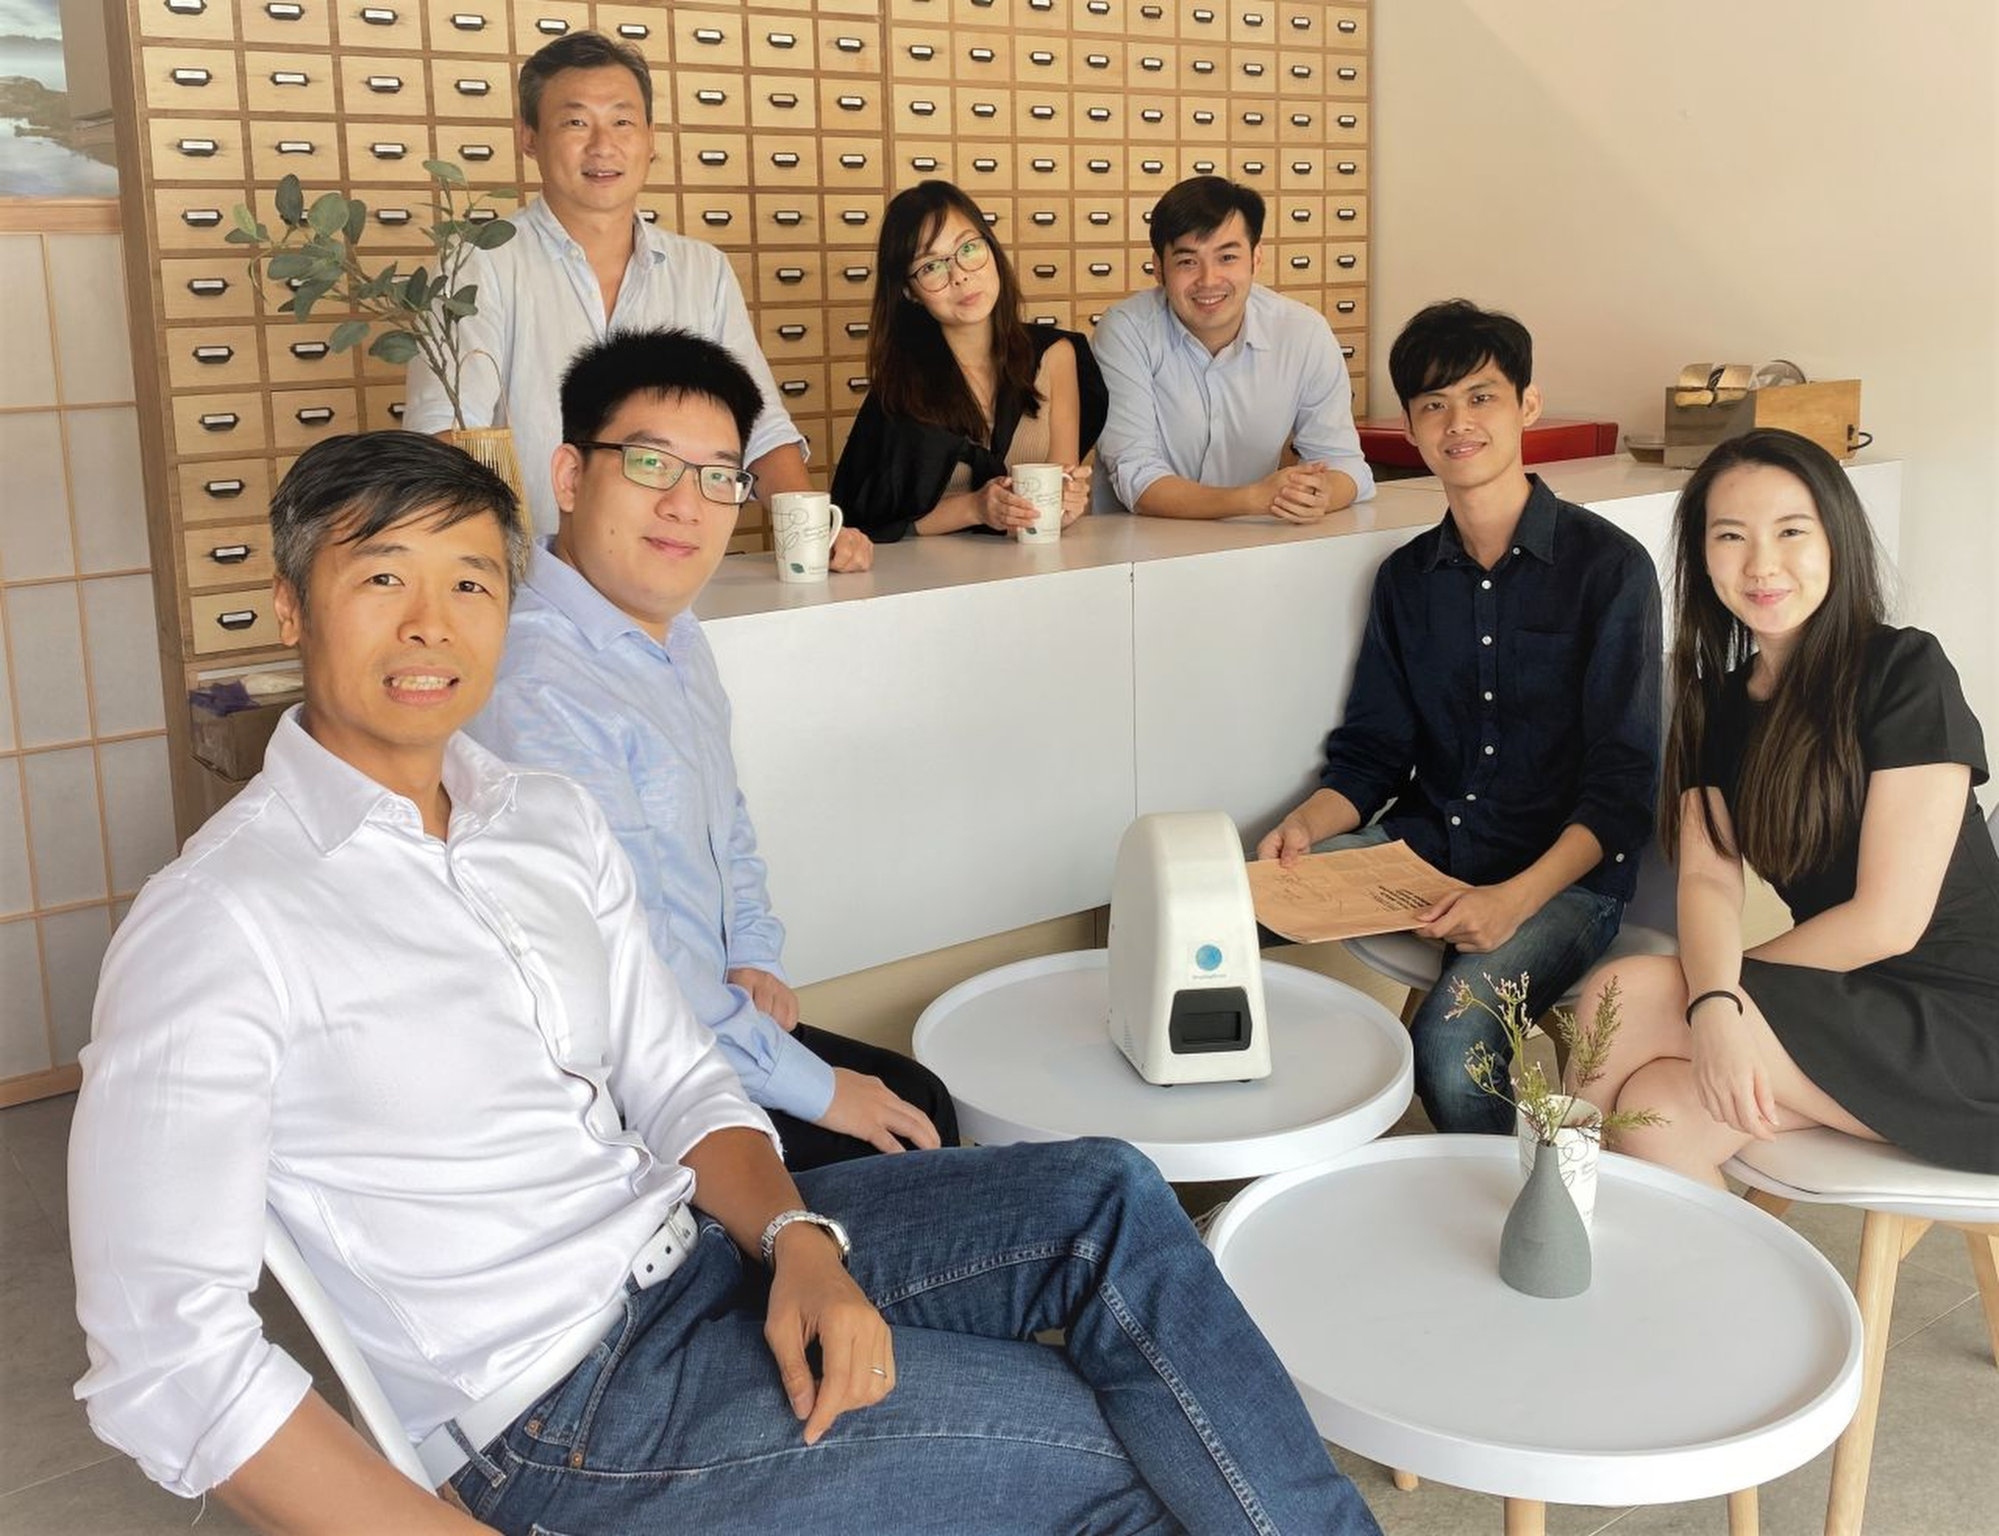 ProfilePrint CEO and founder Alan Lai (front left) along with his team. Photo: Handout